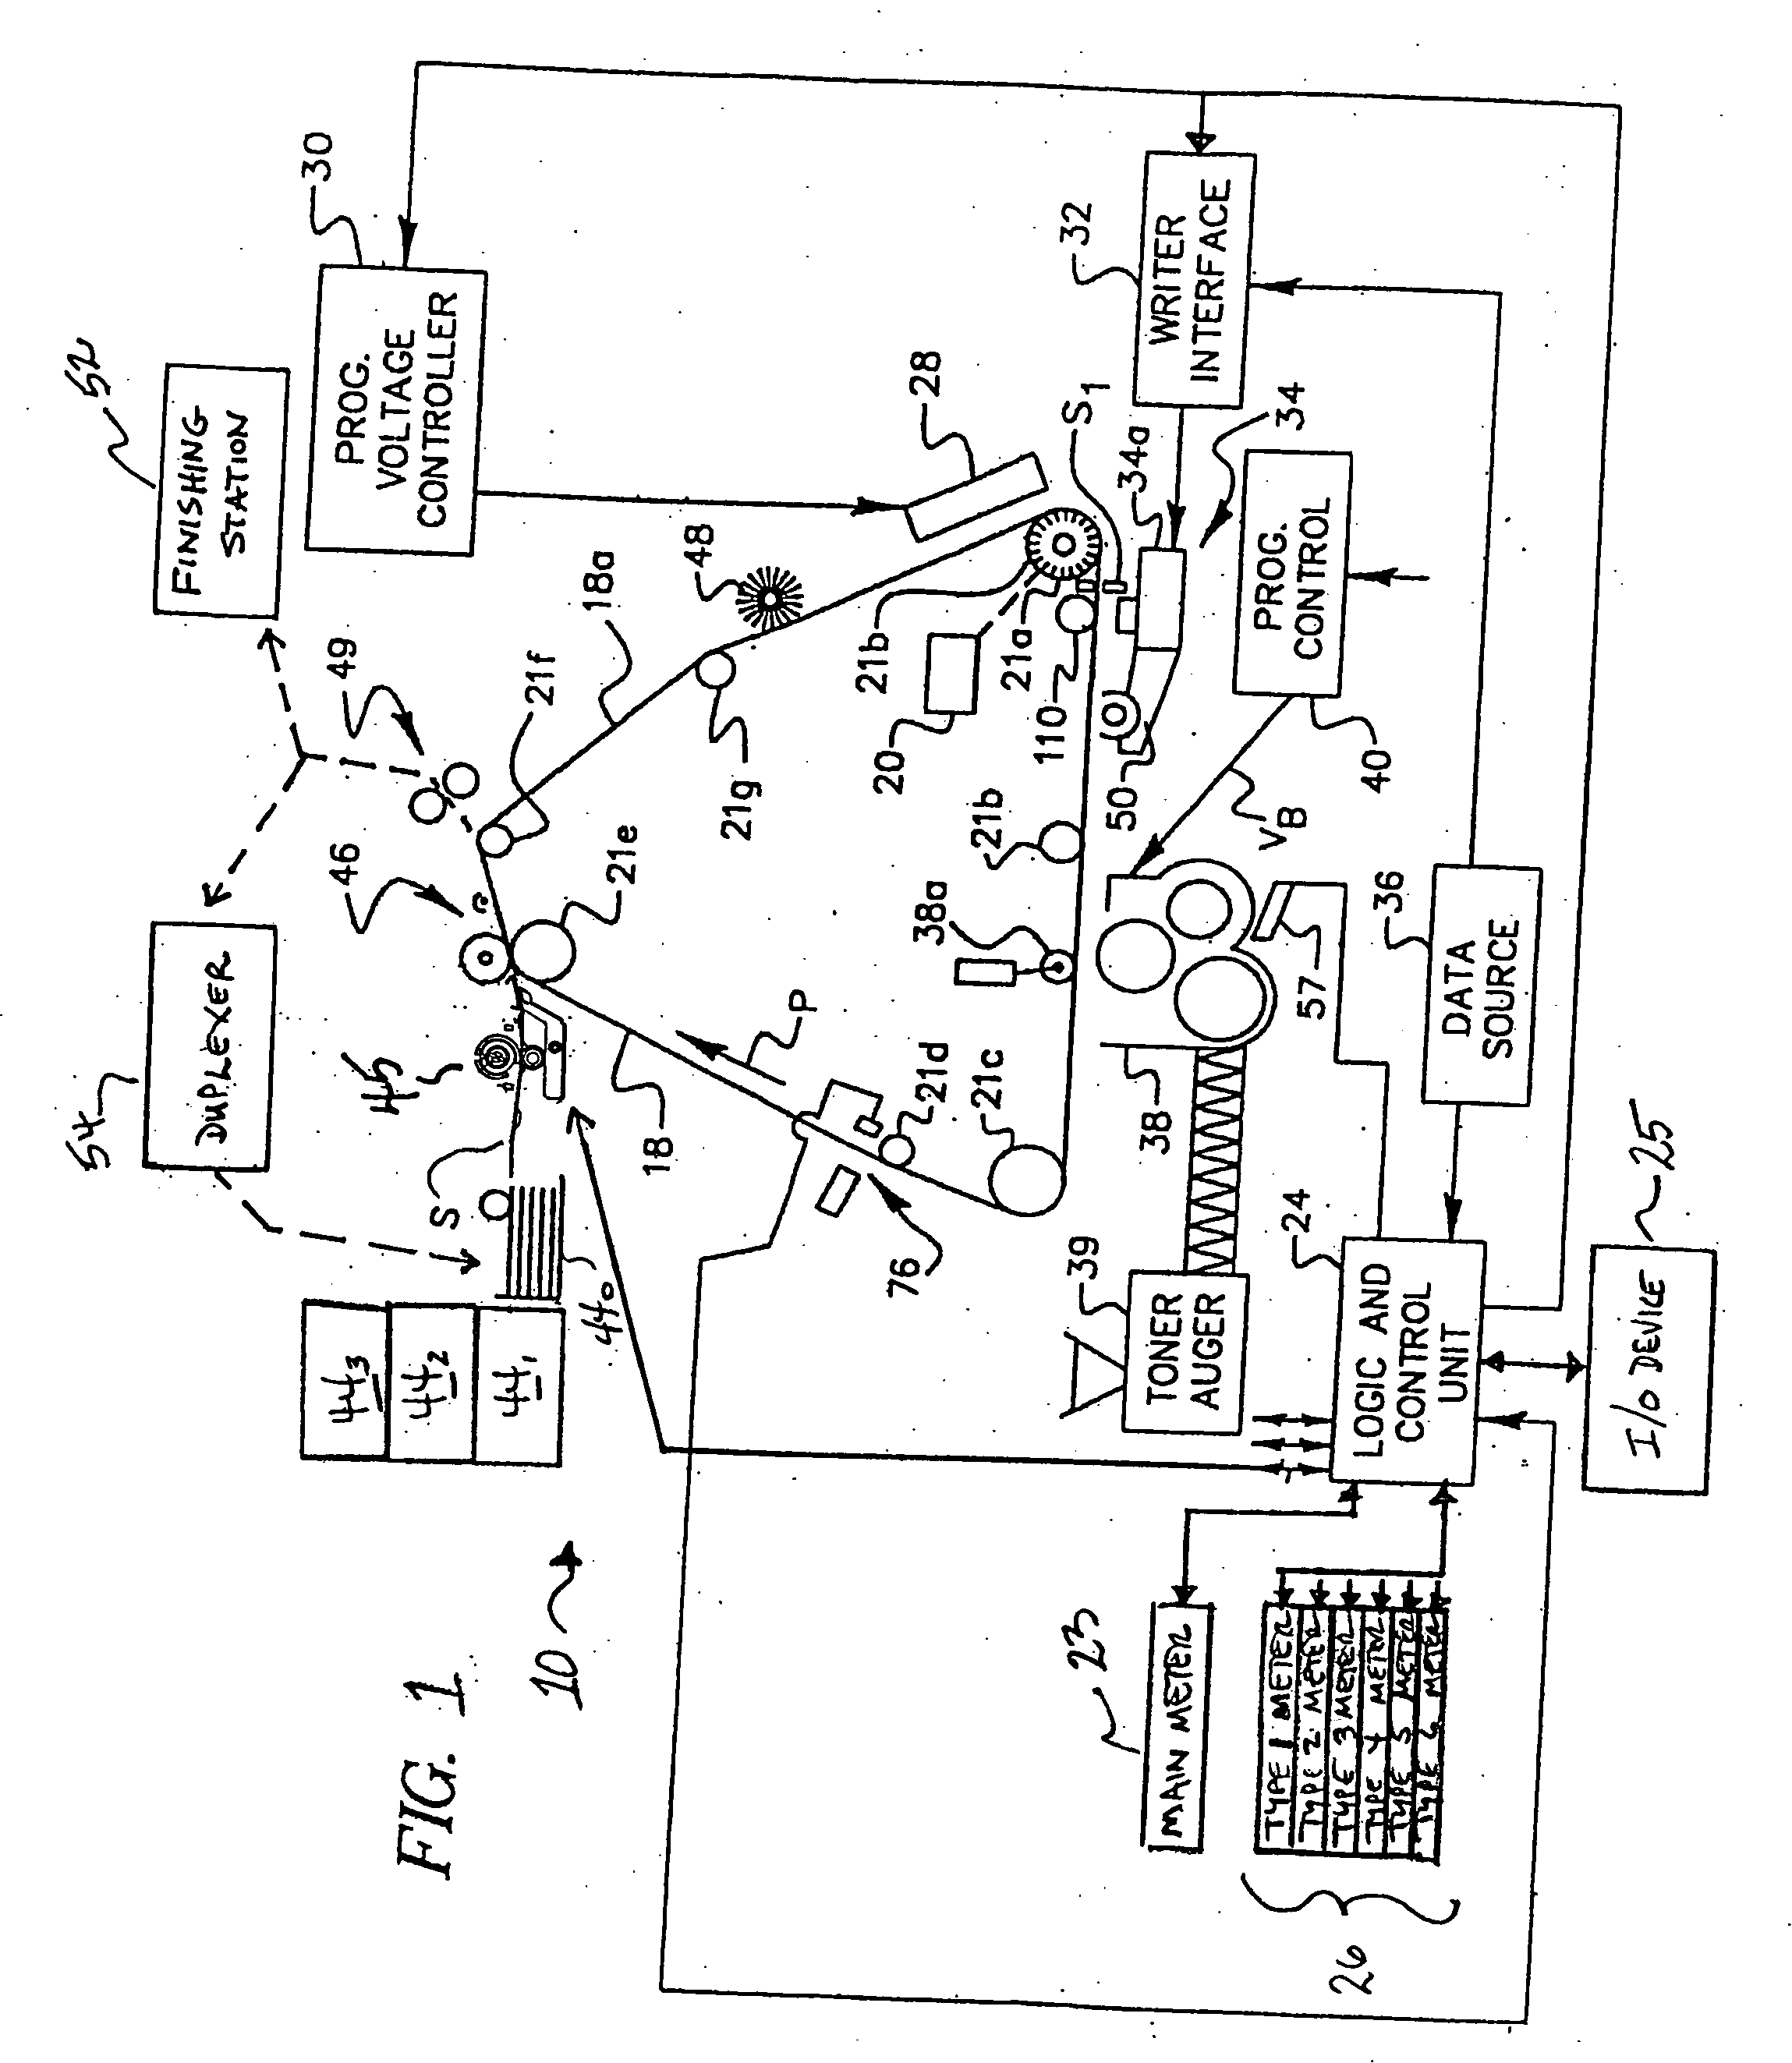 Monitoring of receiver type usage in a printing machine